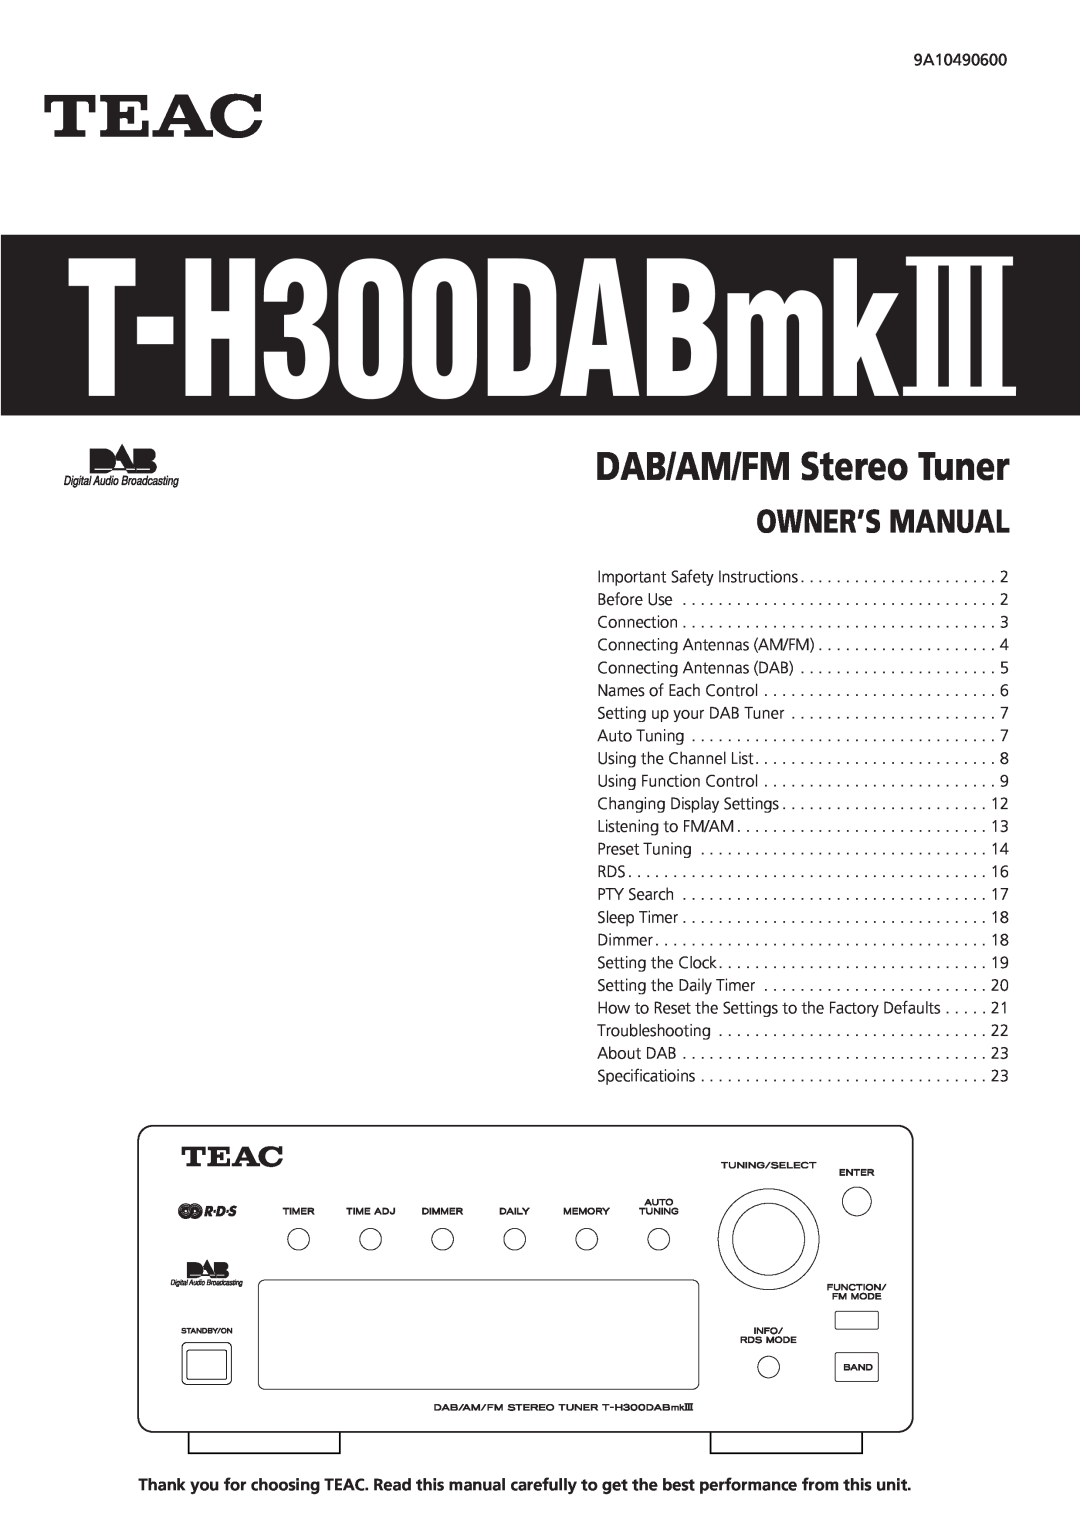 Teac T-H300DABmkIII DAB/AM/FM Stereo Tuner, 9A10490600 owner manual T-H300DABmk# 